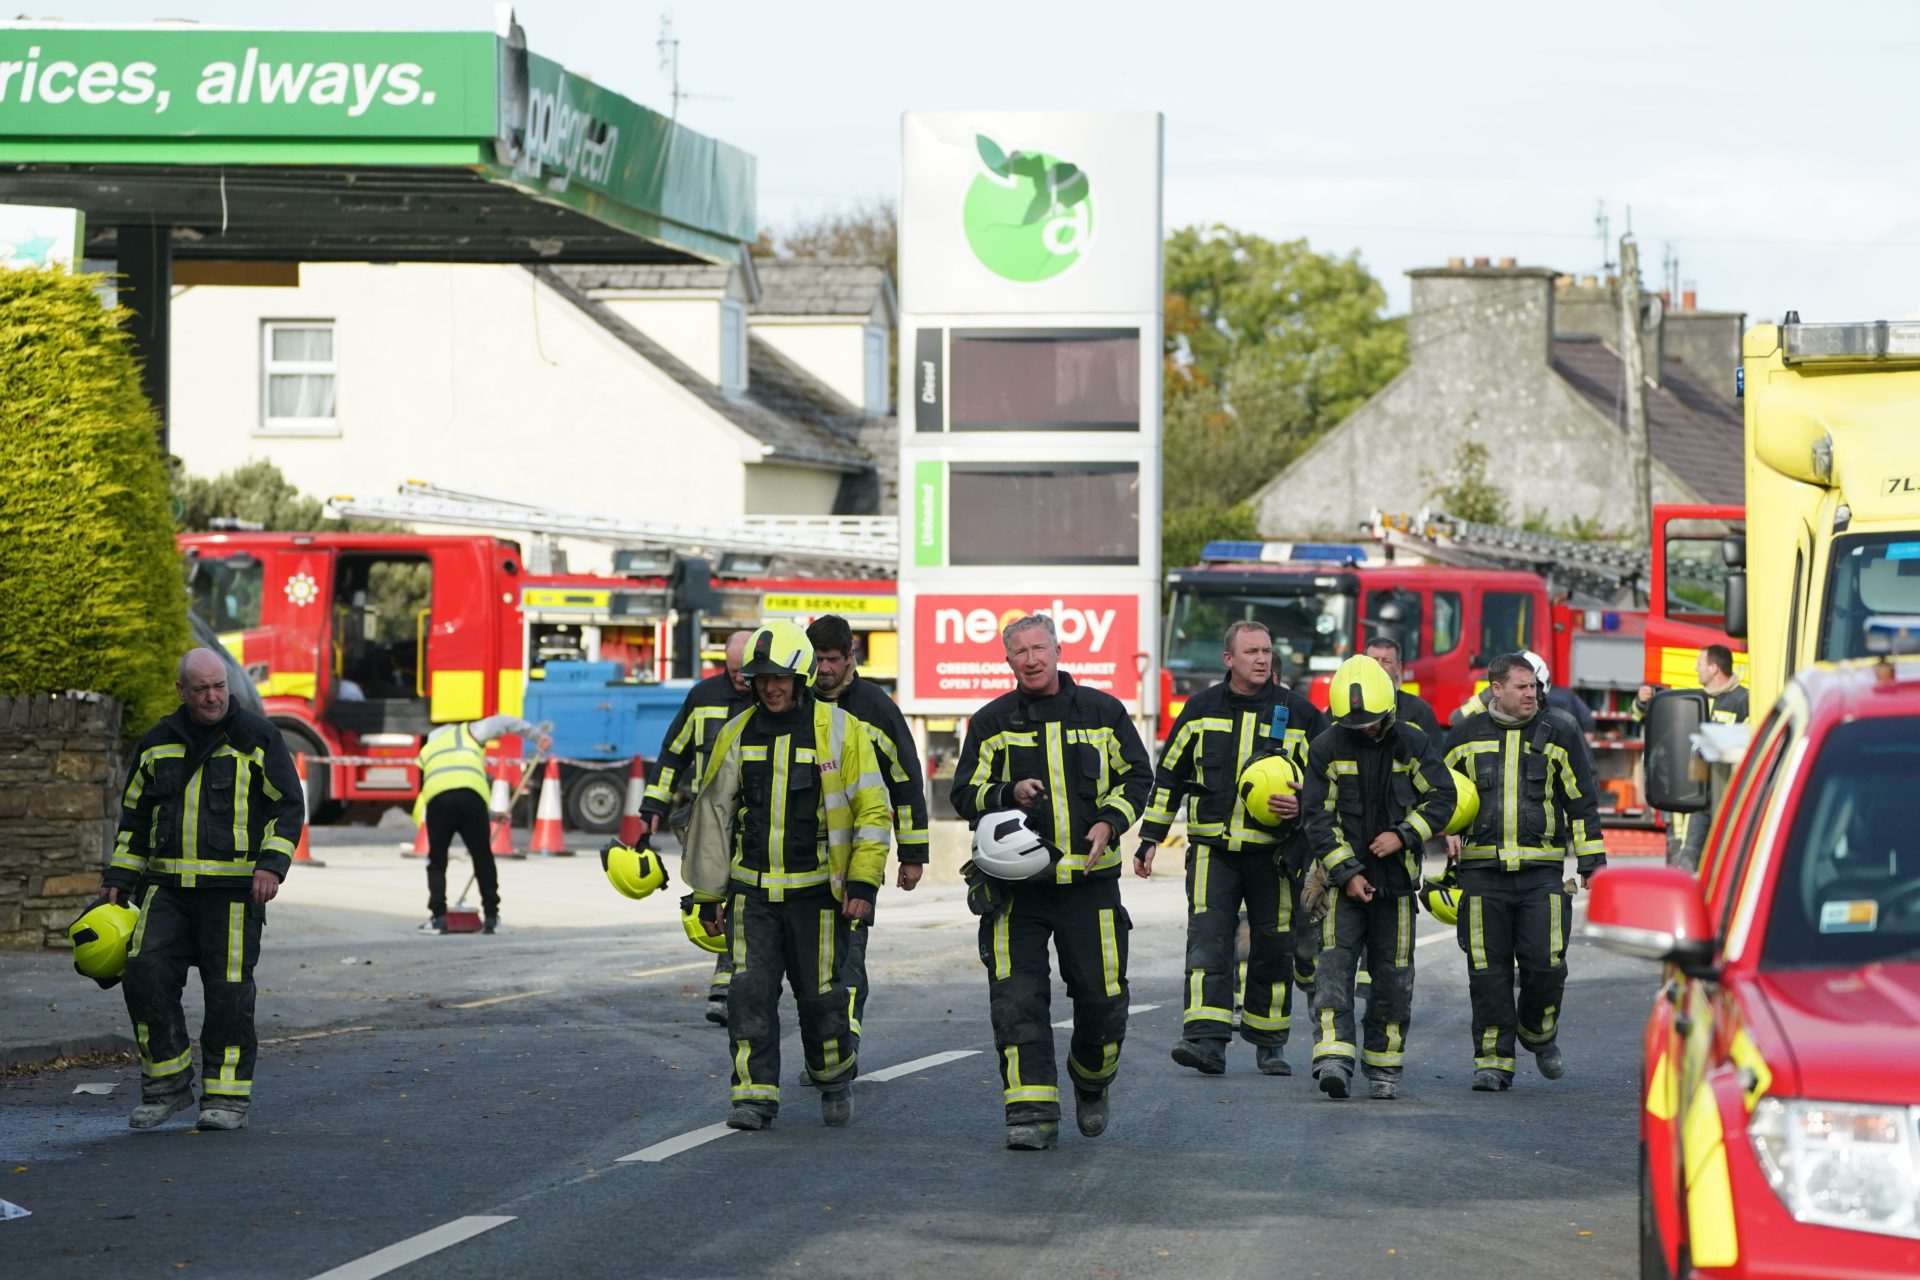 Firefighters leave the scene of an explosion at Applegreen service station in the village of Creeslough in County Donegal, 08-10-2022. Image: PA Images / Alamy